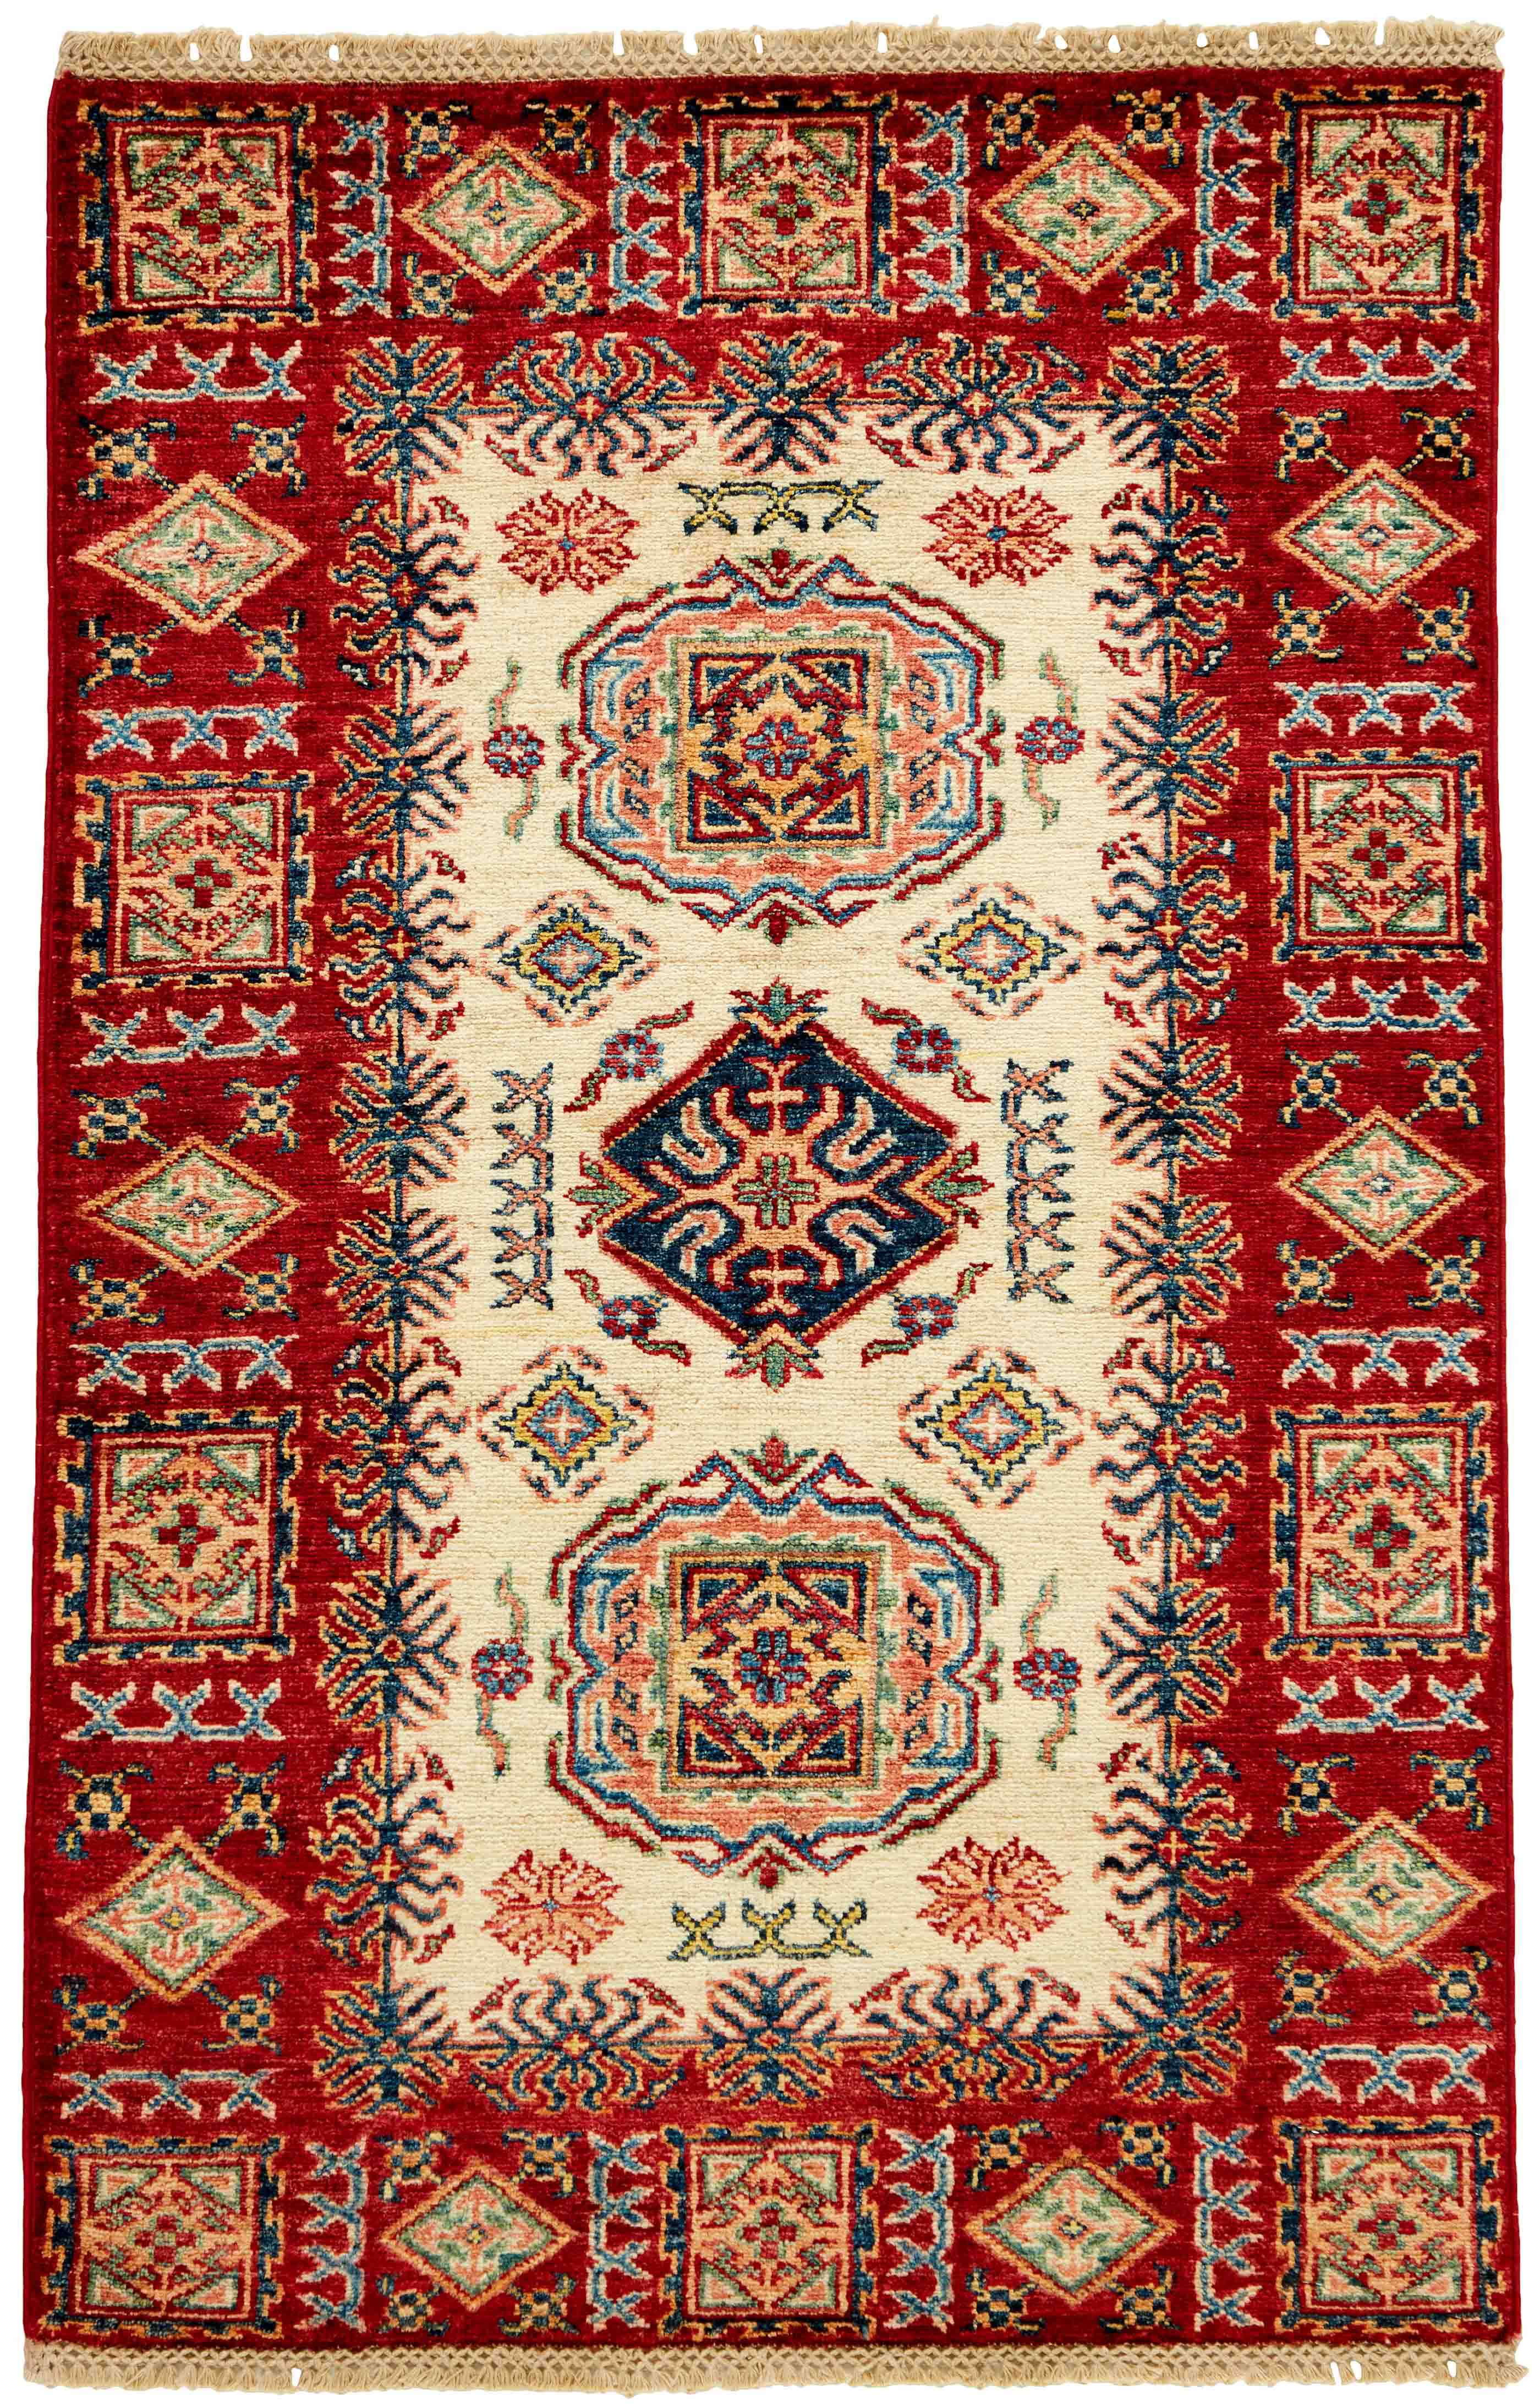 Authentic oriental rug with red and black traditional geometric design